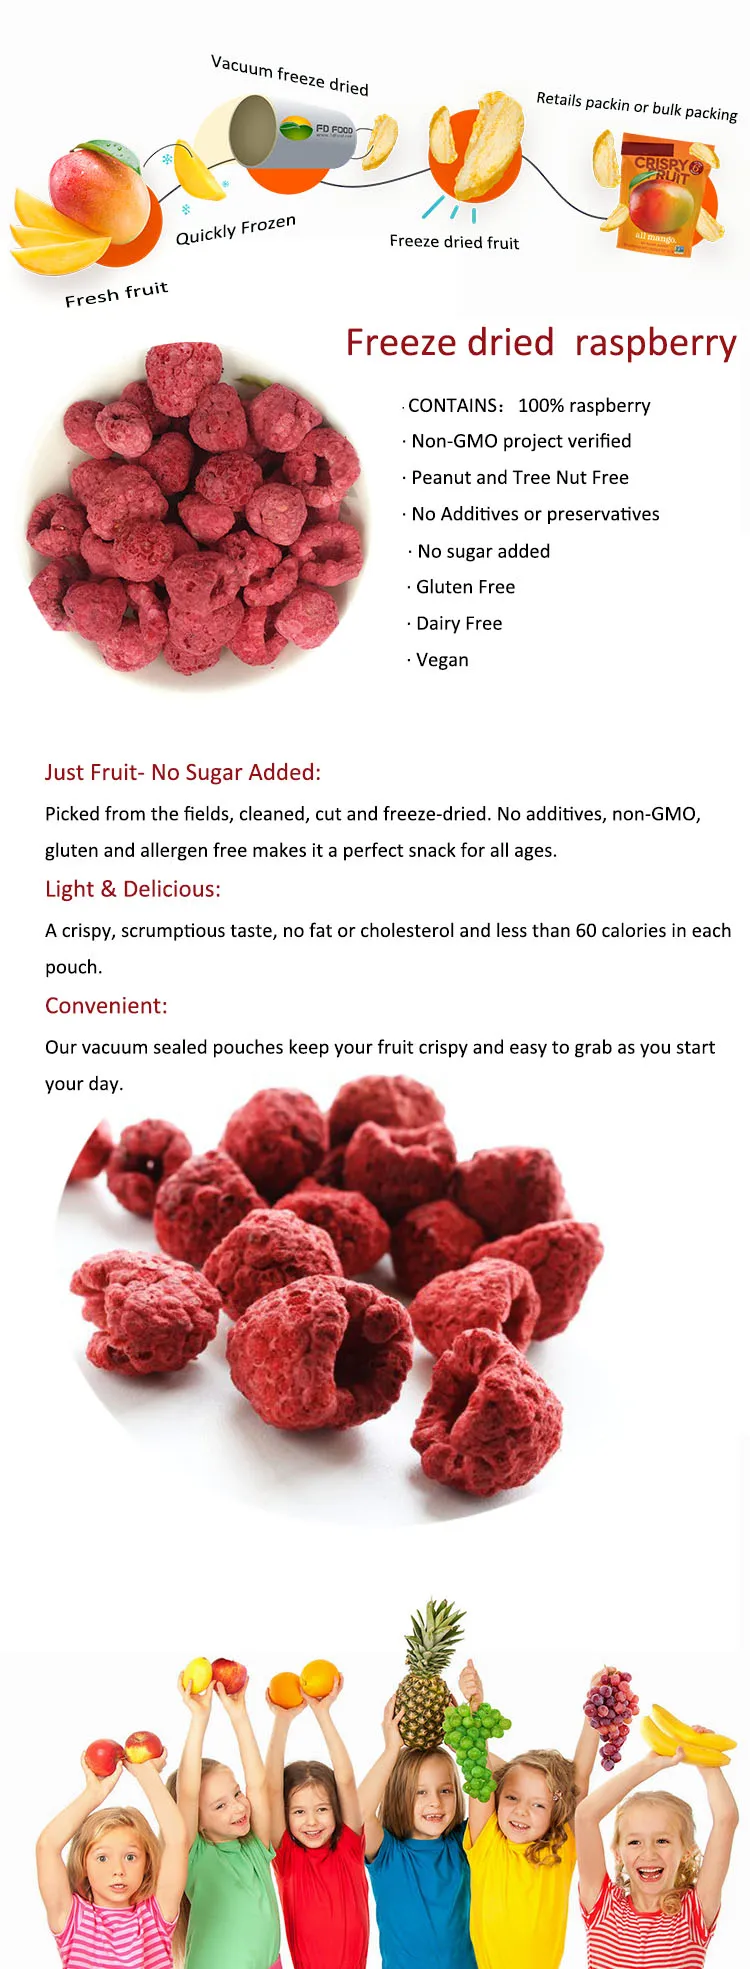 **Naturally Sweetened Delights: Exquisite Monk Fruit Recipes for Diabetics**